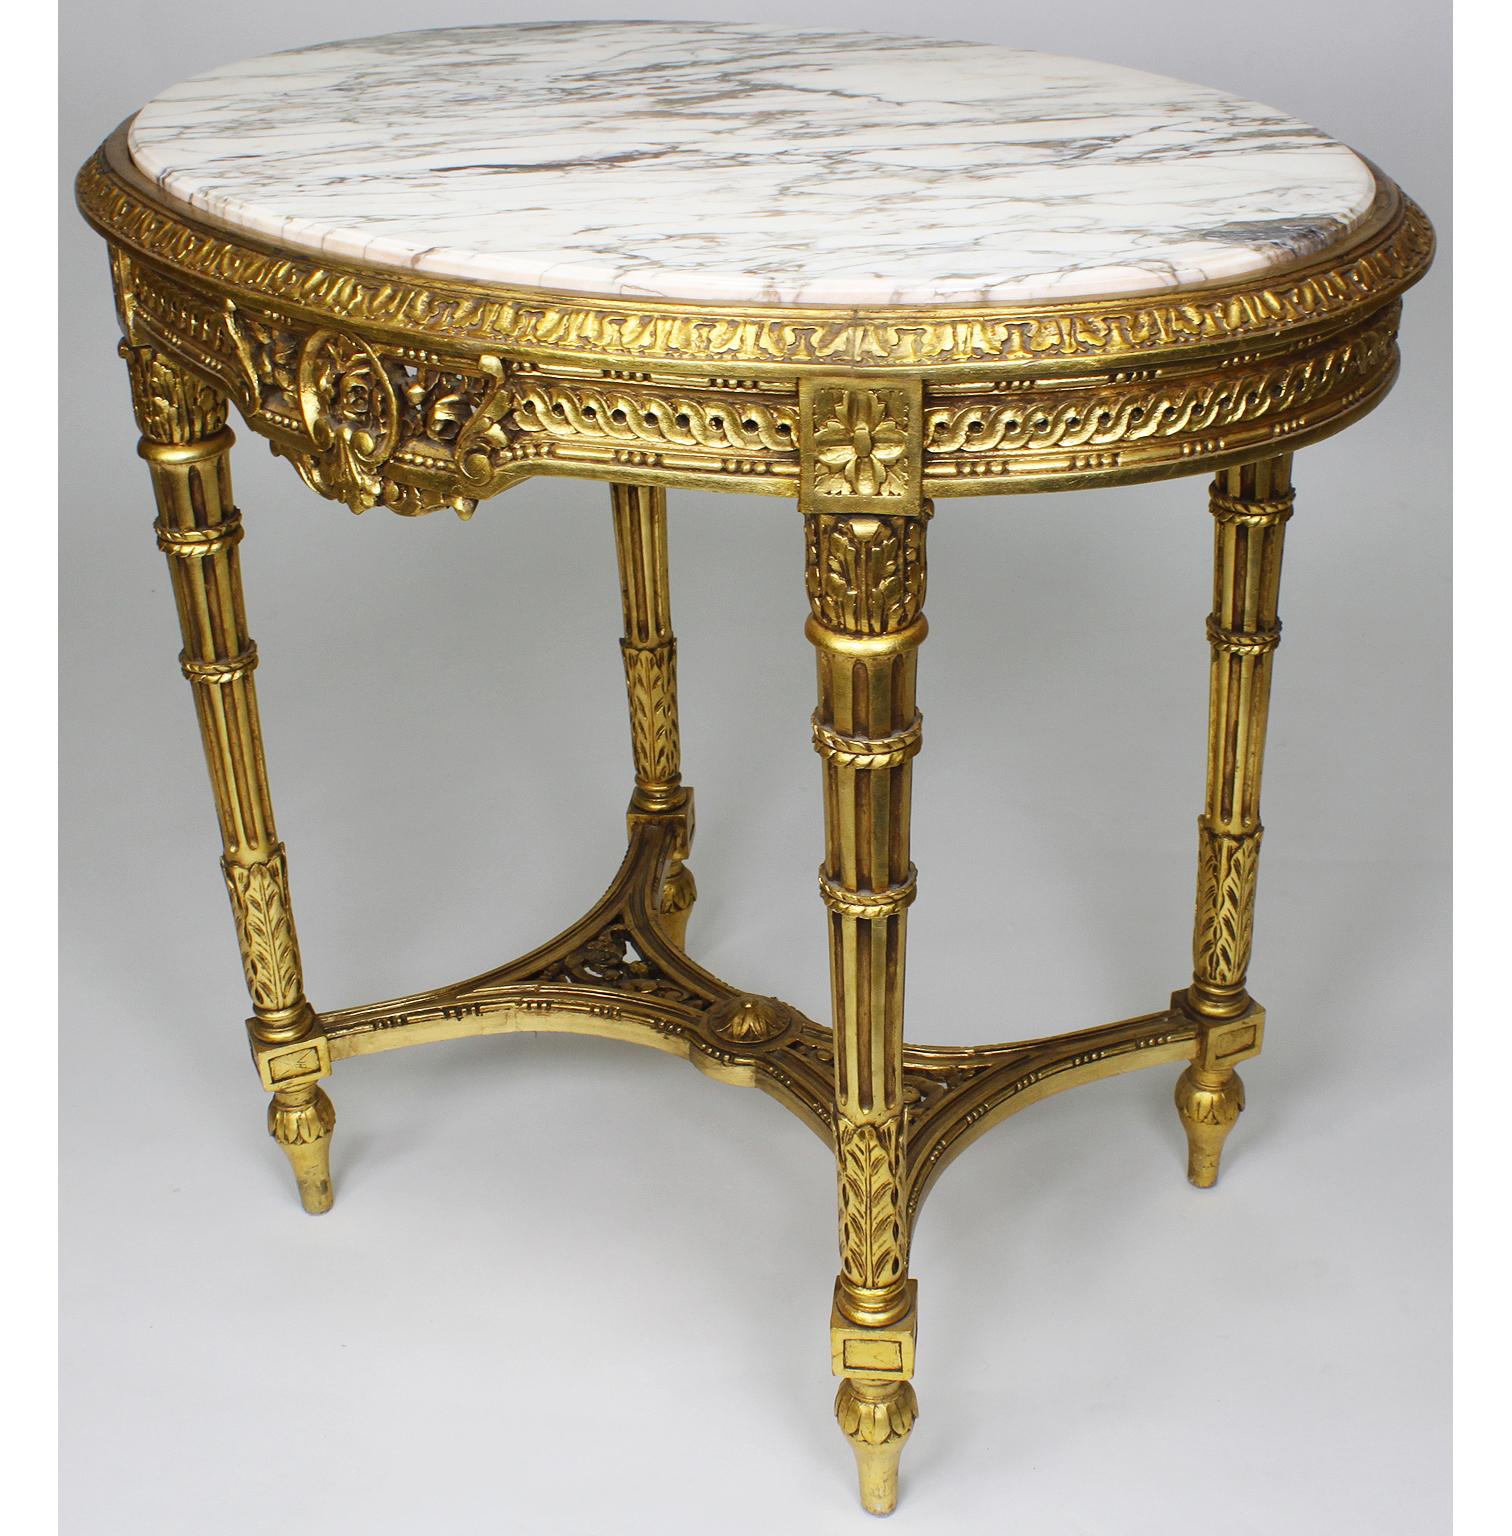 A French Louis XVI Style 'Belle Époque' oval giltwood carved center table with marble top. The ornately decorated apron topped with a veined white marble top and raised on four fluted legs conjoined with a 